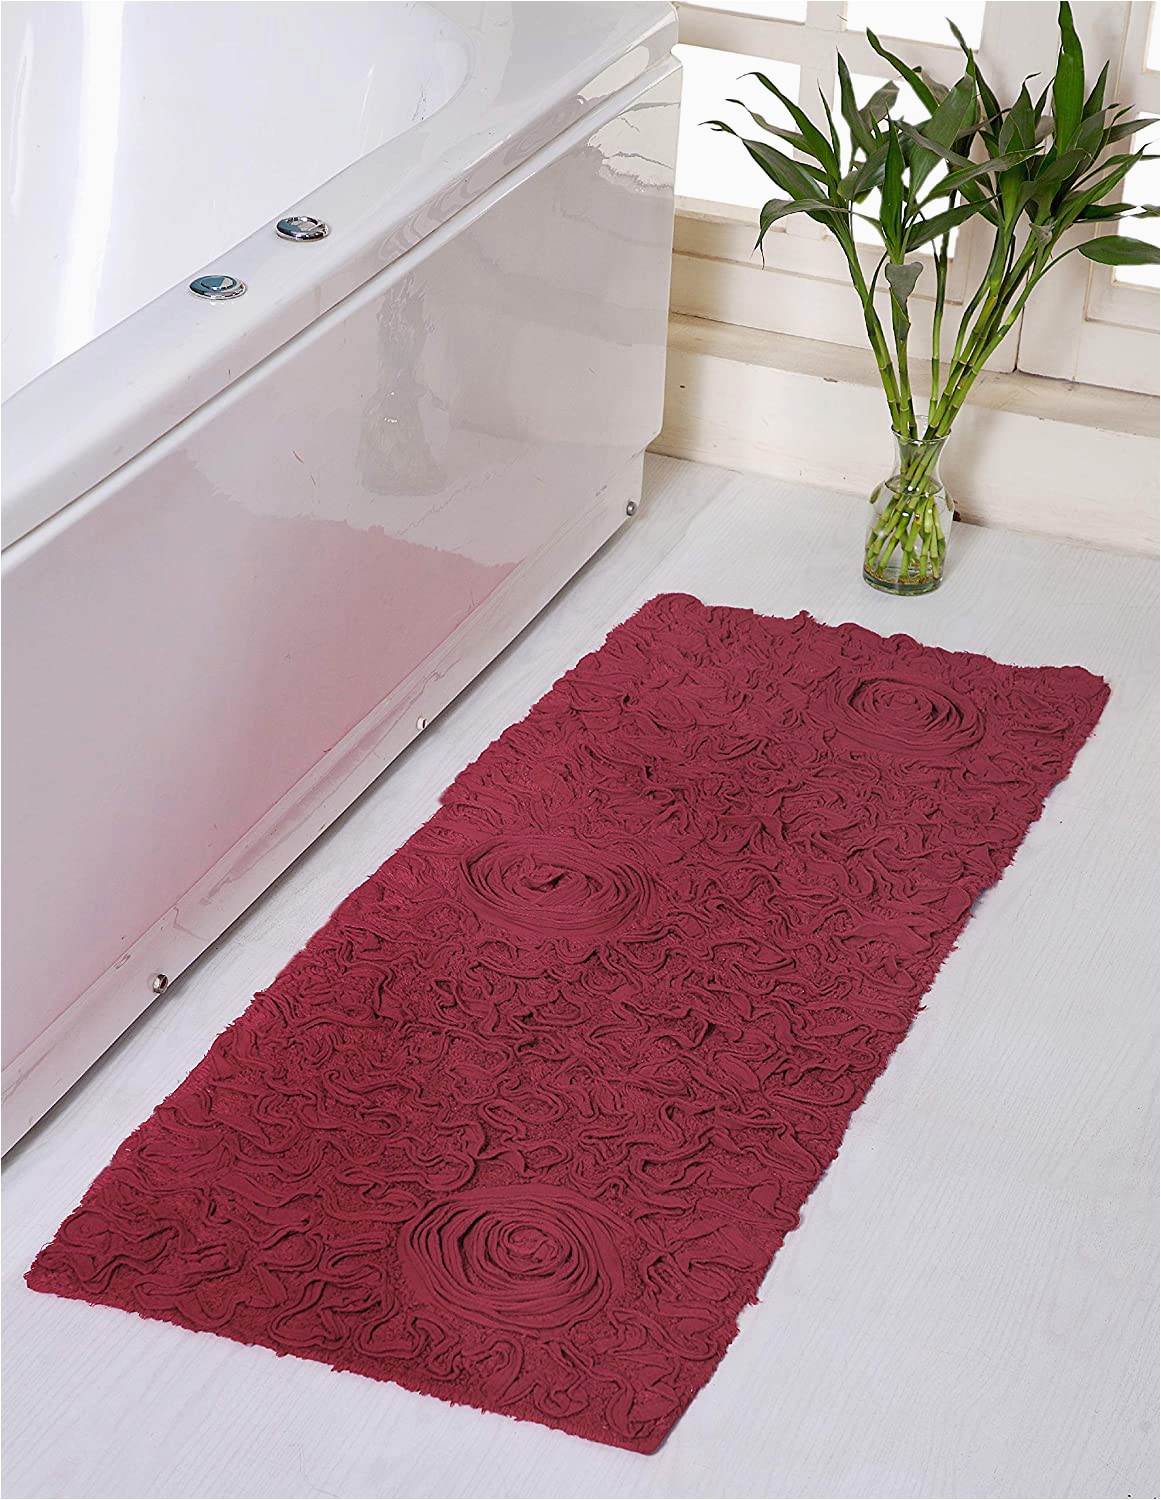 Round Red Bathroom Rug Home Weavers Bell Flower Collection Absorbent Cotton soft Rug Machine Wash Dry 21"x54" Red